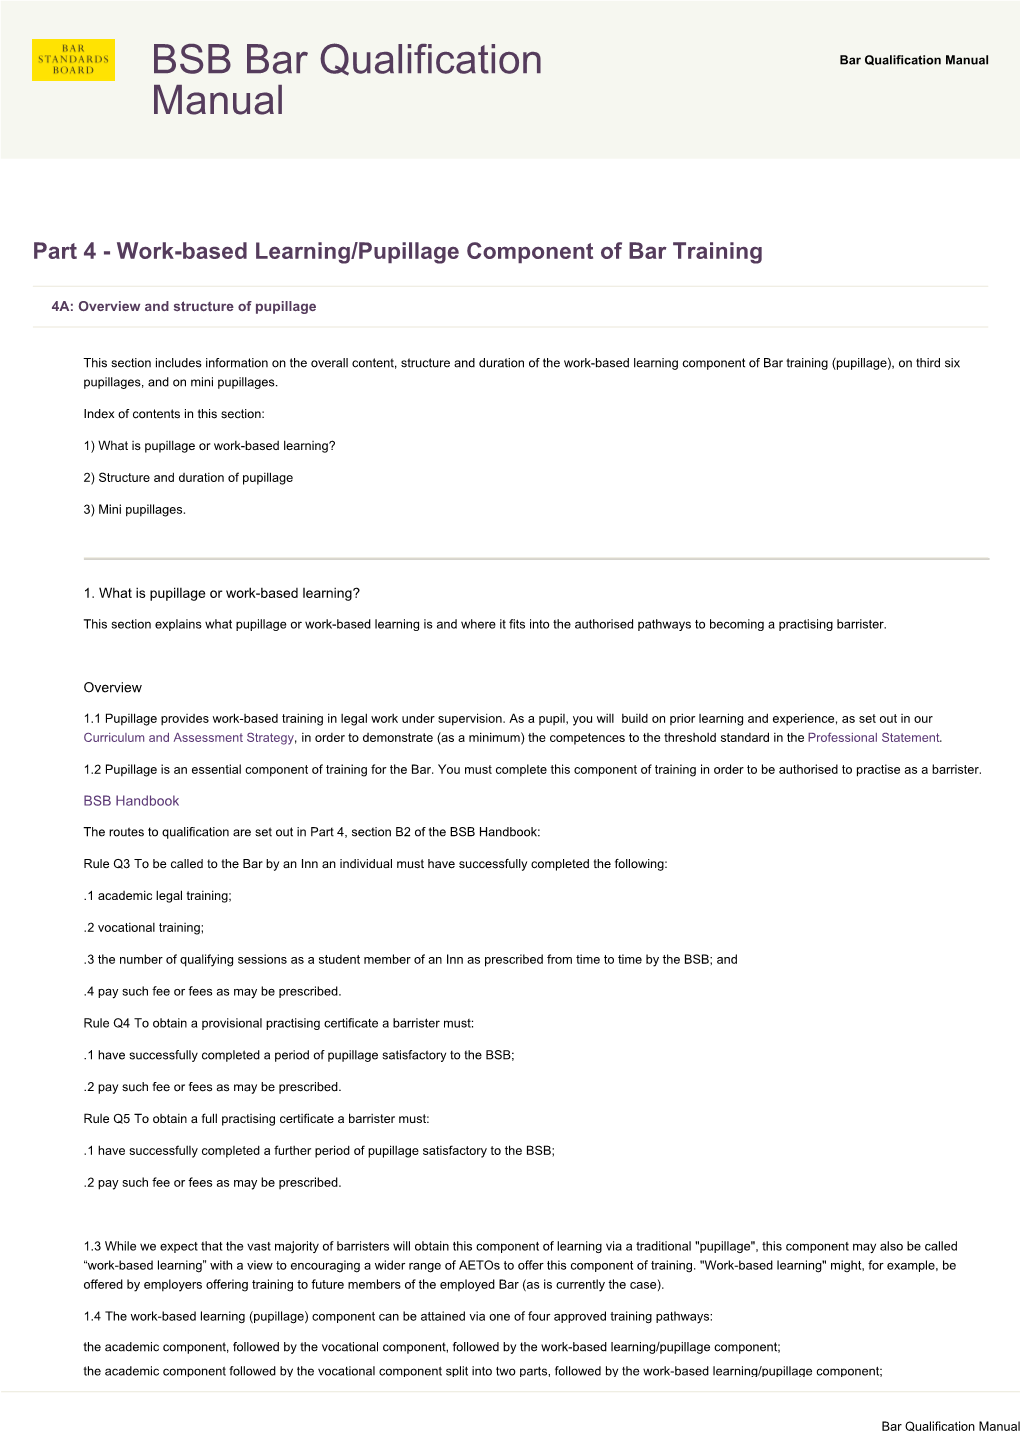 Part 4 - Work-Based Learning/Pupillage Component of Bar Training